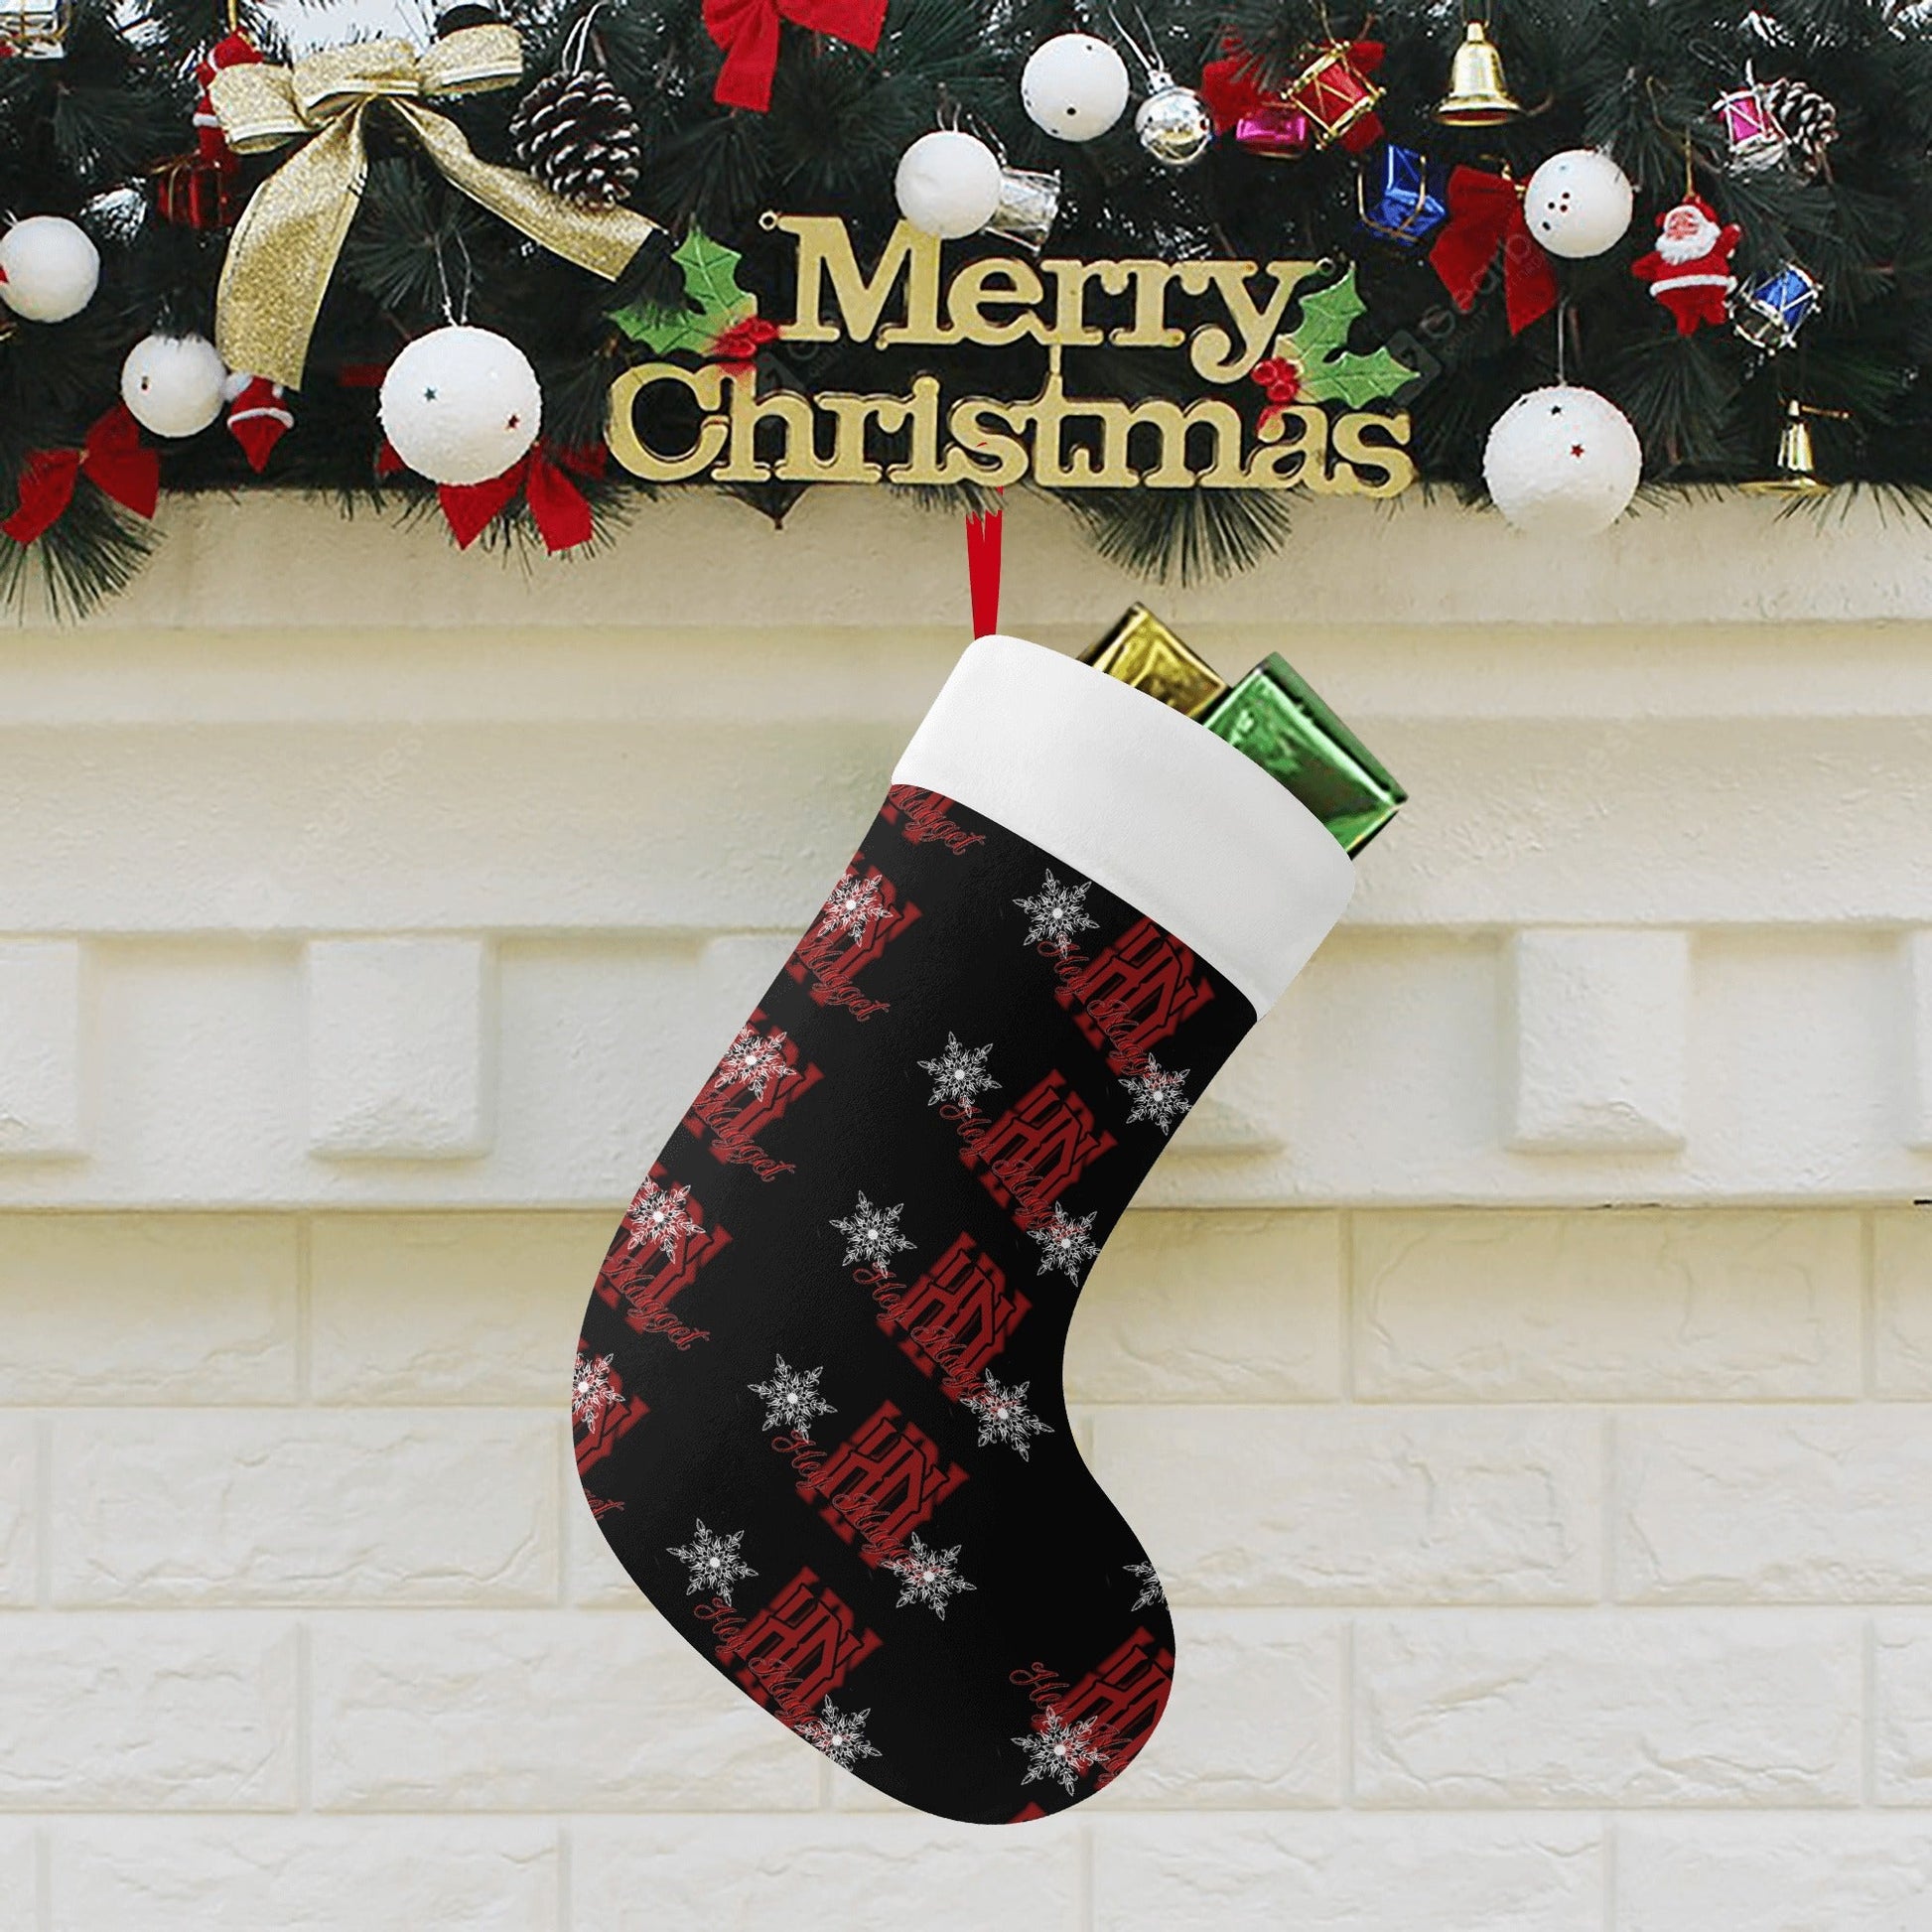 Stand out  with the  HN Christmas Stockings  available at Hey Nugget. Grab yours today!